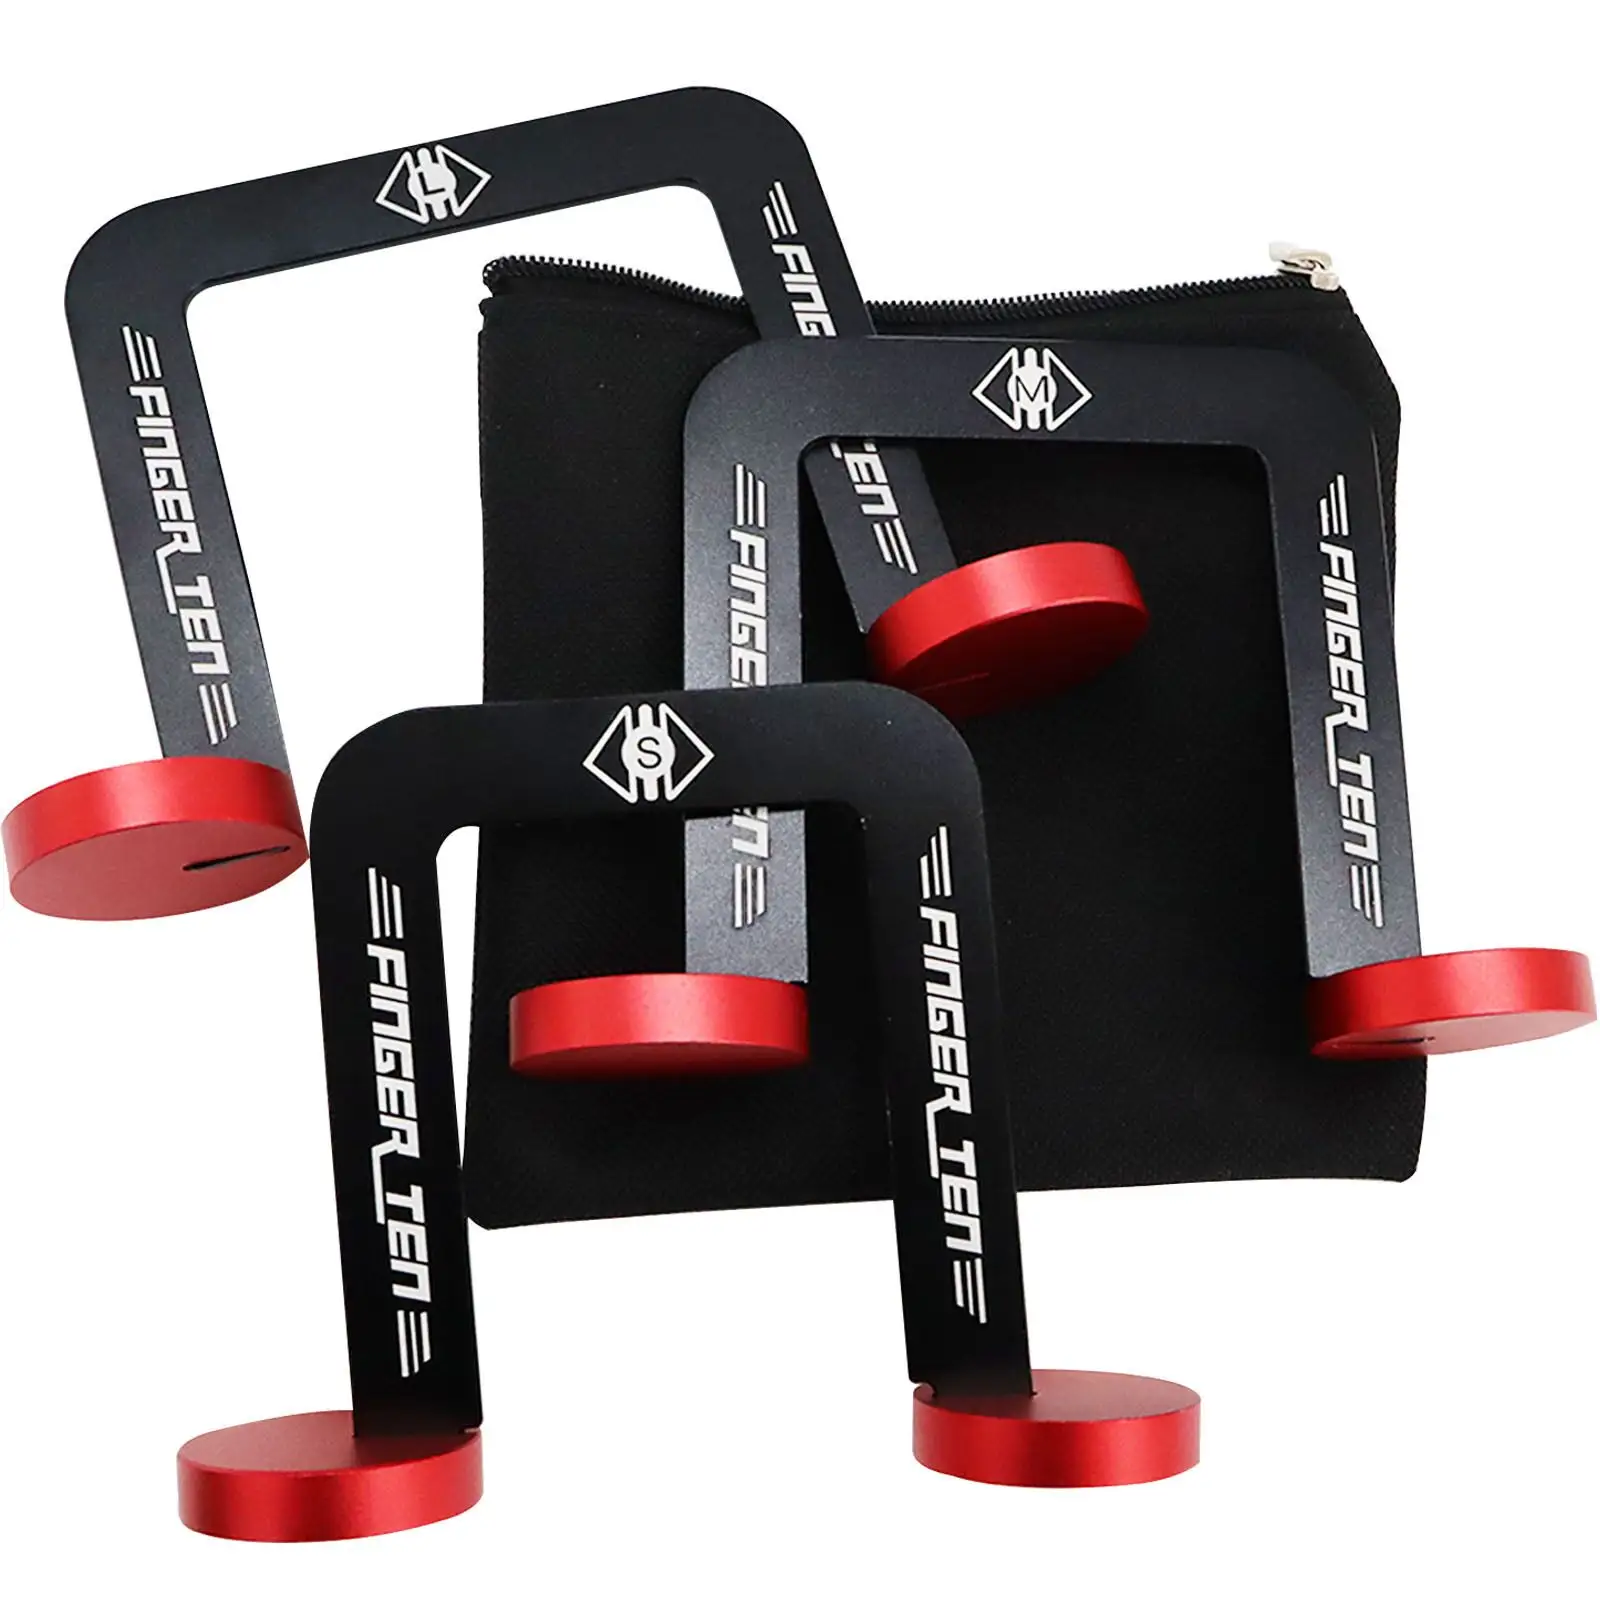 Golf Putter Trainer Golf Trainer Accessory Putting Training Aids